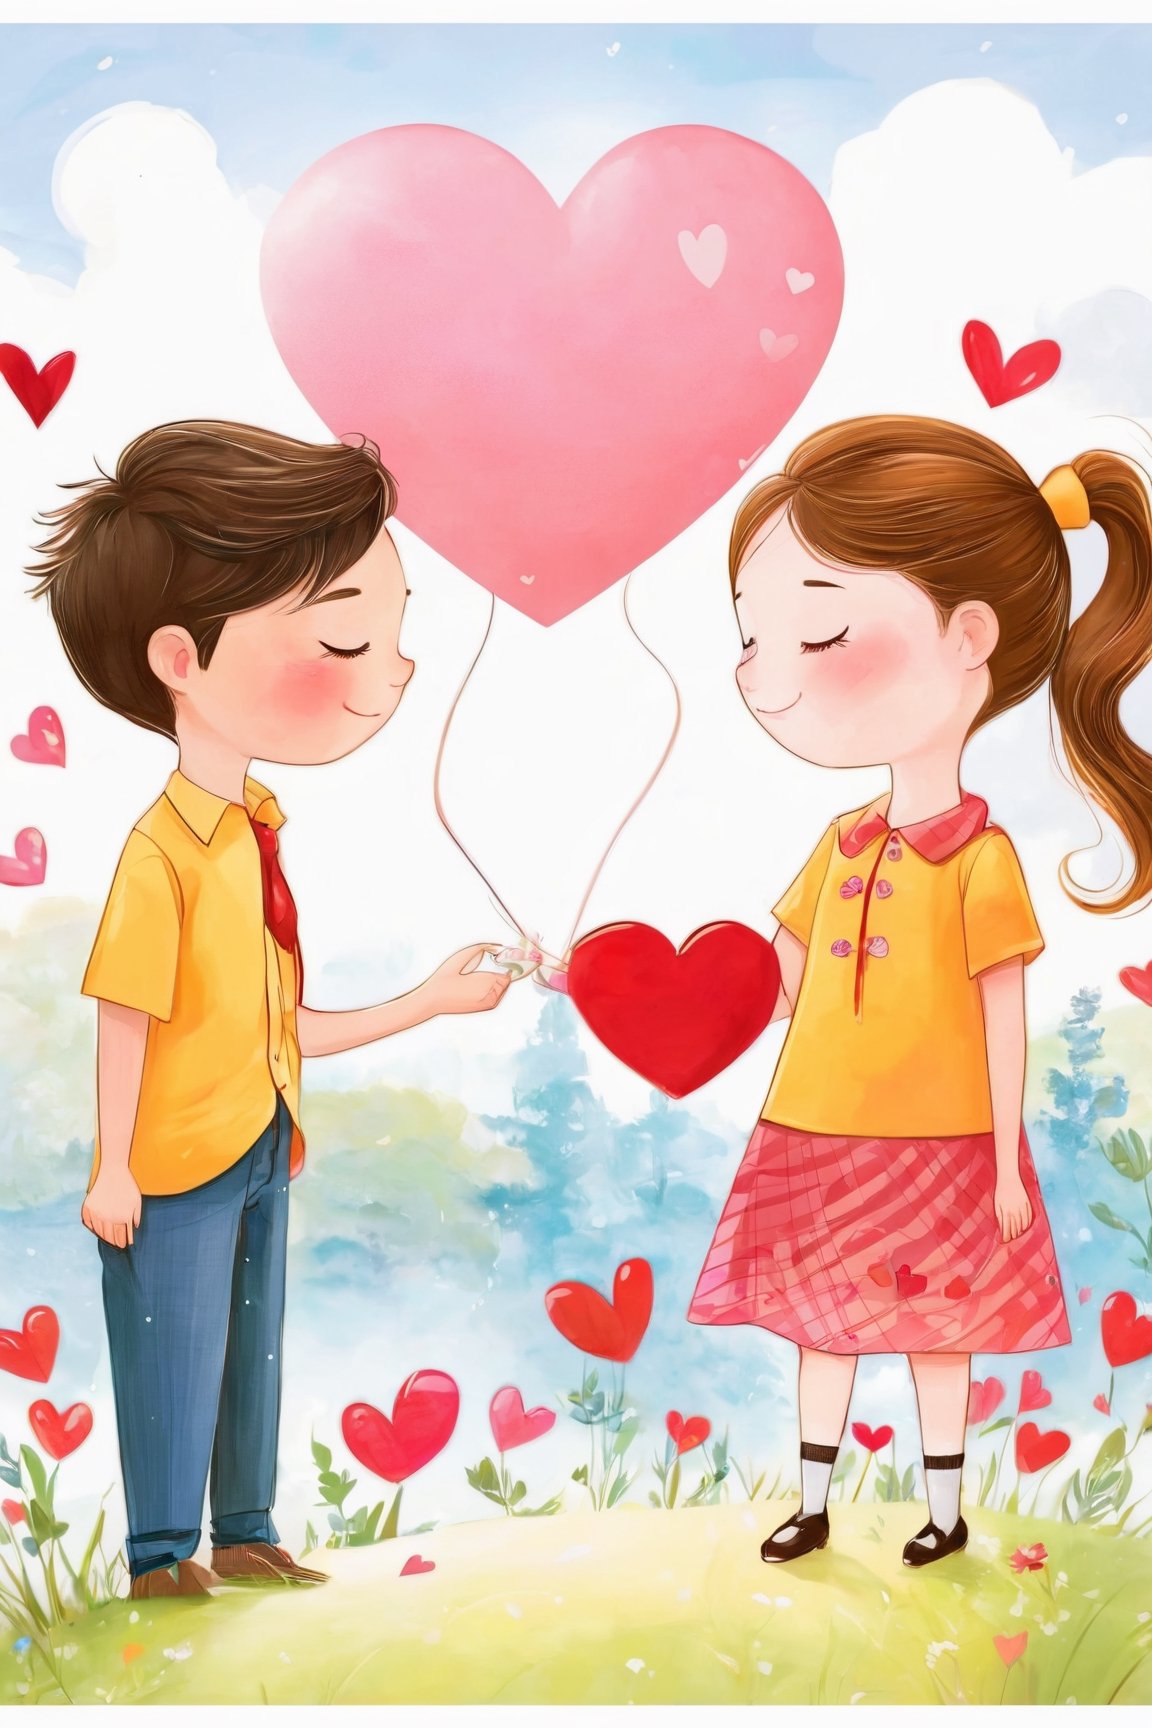 (best quality,8K,highres,masterpiece), ultra-detailed, Valentine's Day inspired scene featuring a couple in a sweet, intimate moment. The girl, with a radiant smile and short brown hair, wears a shirt that contrasts beautifully with the boy's yellow or orange shirt. They are depicted against a stark white background, focusing the viewer's attention on the connection between them. The boy, in a white collared shirt with short sleeves, gently kisses the girl on the cheek, who responds with closed eyes and a content expression, her hair tied back in a practical ponytail. The simplicity of their attire, including the girl's dress and the boy's casual shirt, underscores the genuine and heartfelt emotion of the scene. Blush stickers on their cheeks add a playful, animated touch to their expressions, emphasizing the warmth and affection they share. The artwork captures the essence of young love, symbolized by a heart that encompasses their joy and companionship, celebrating Valentine's Day with a portrayal of innocent and joyful affection.